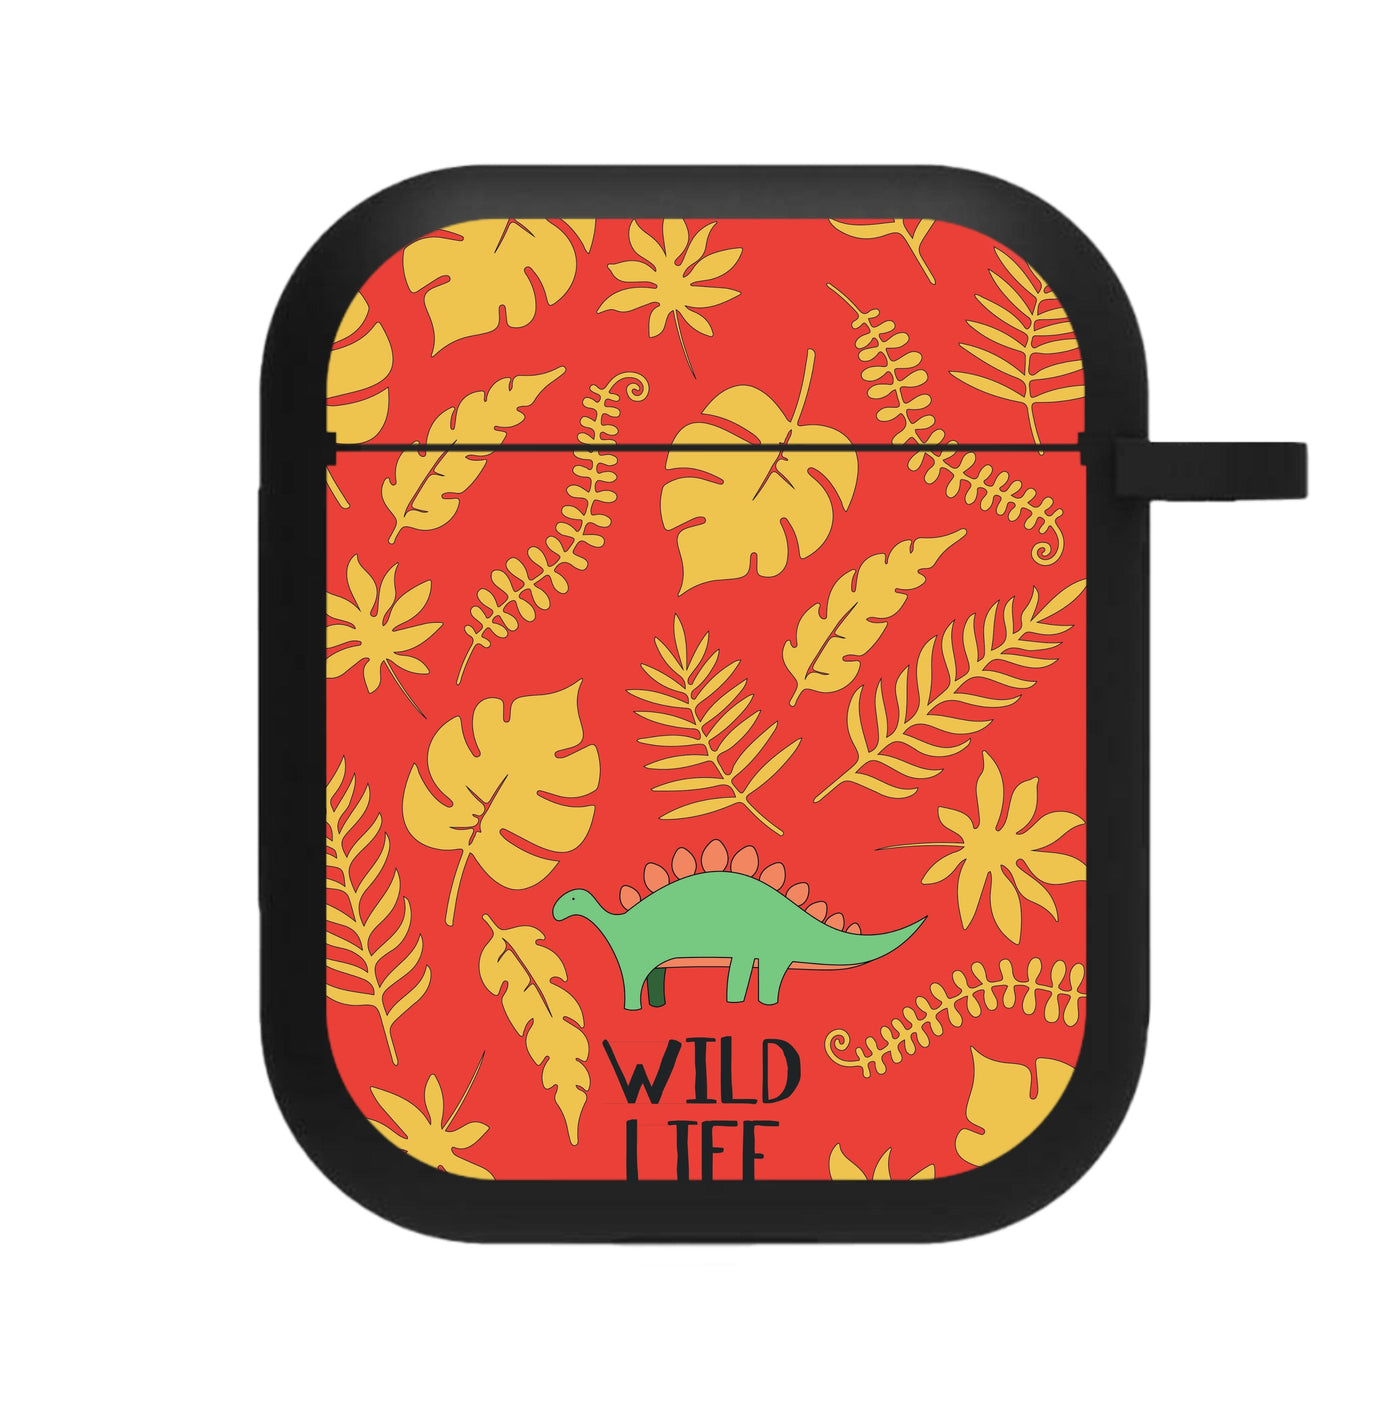 Wild Life - Dinosaurs AirPods Case